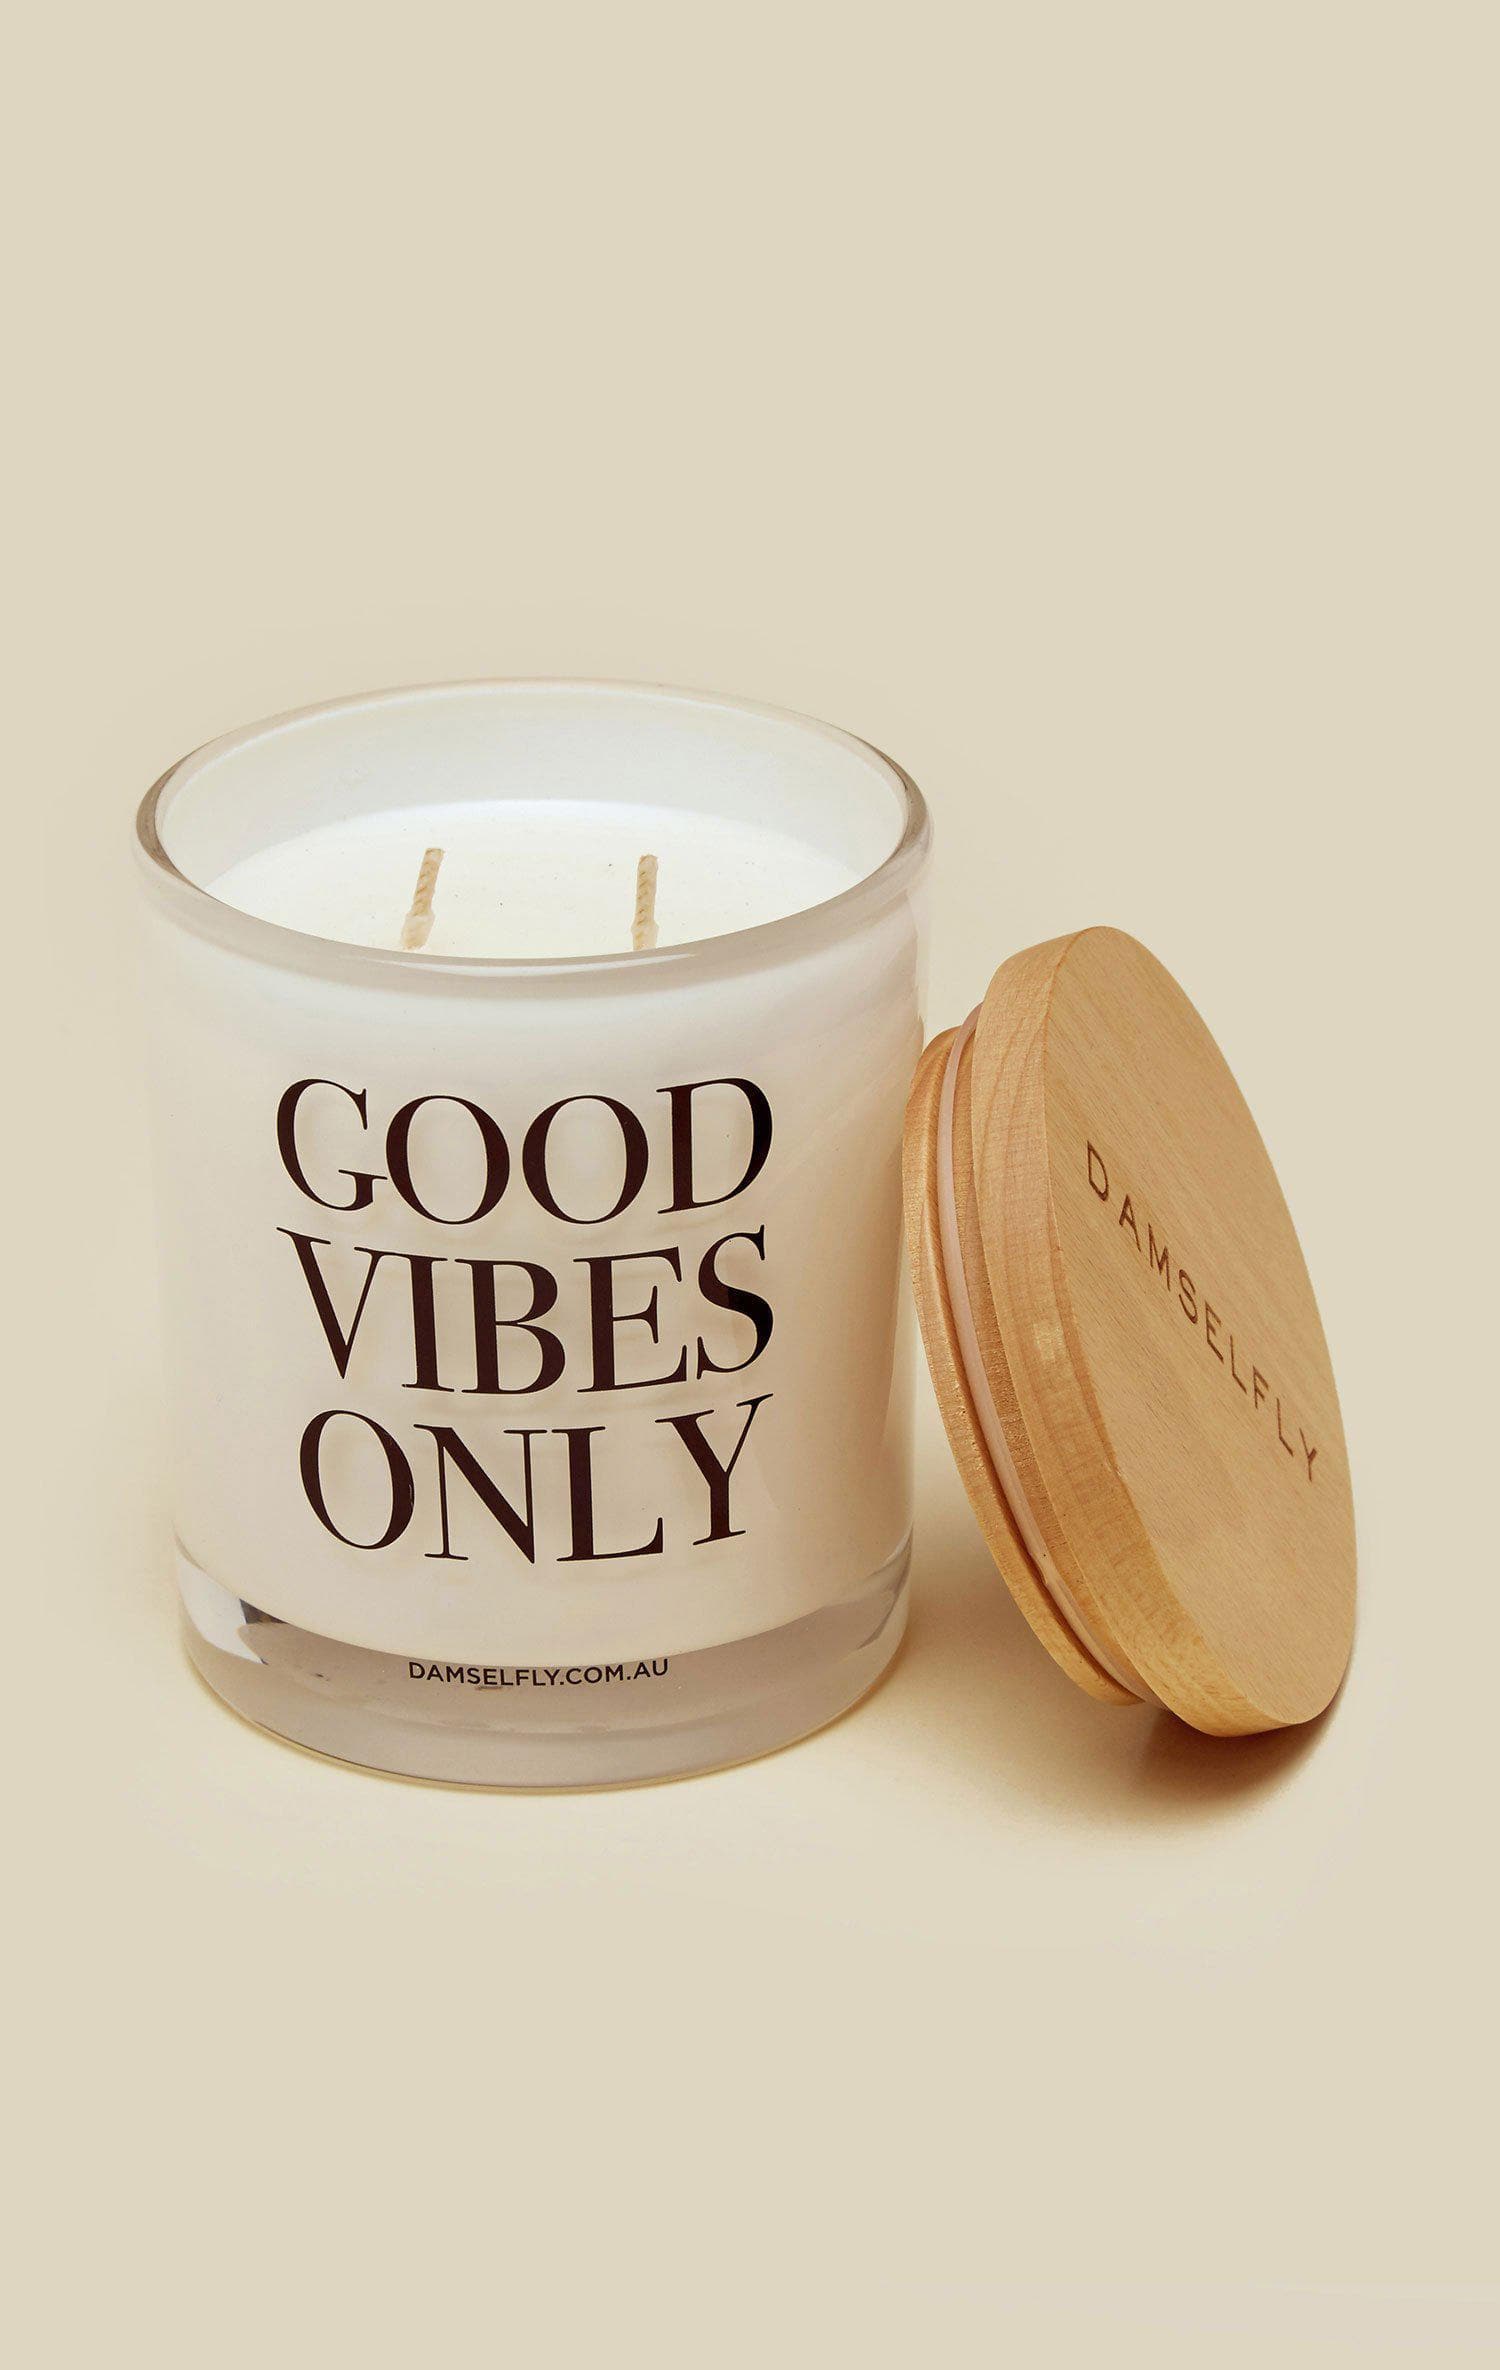 DAMSELFLY GOOD VIBES ONLY CANDLE - GRACE